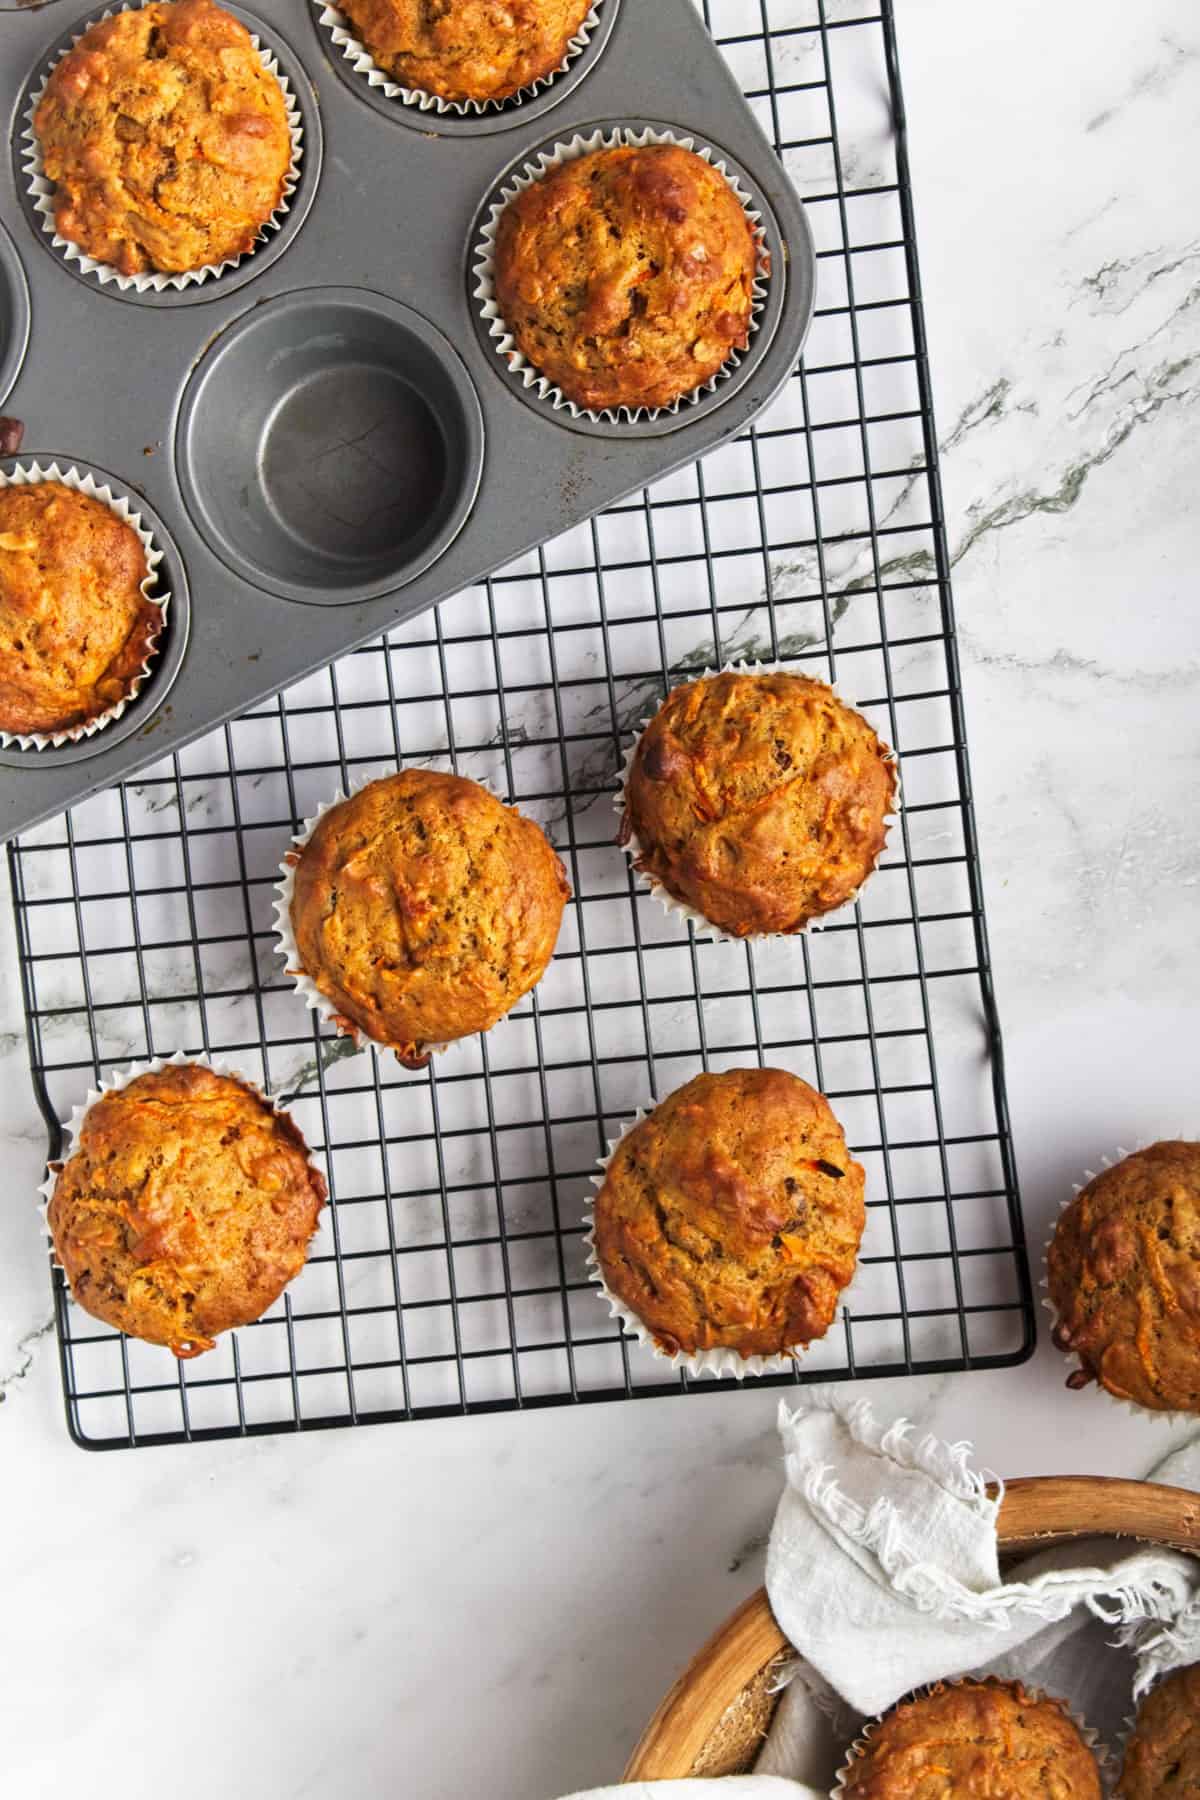 Oatmeal carrot muffins on a wire rack.